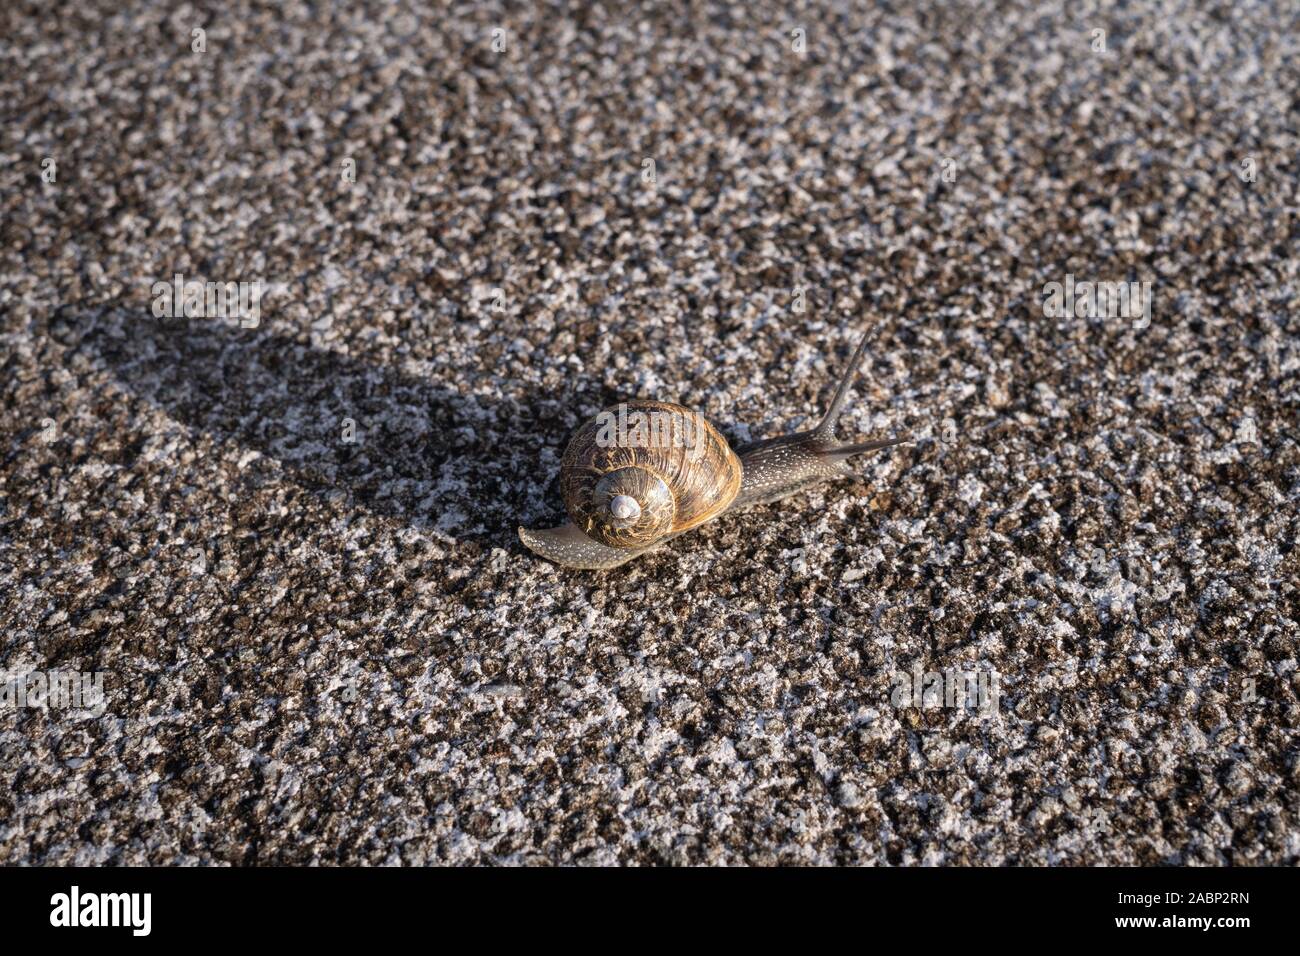 Common snail in shell crawling on granite stone surface. Outdoor at sunset Stock Photo